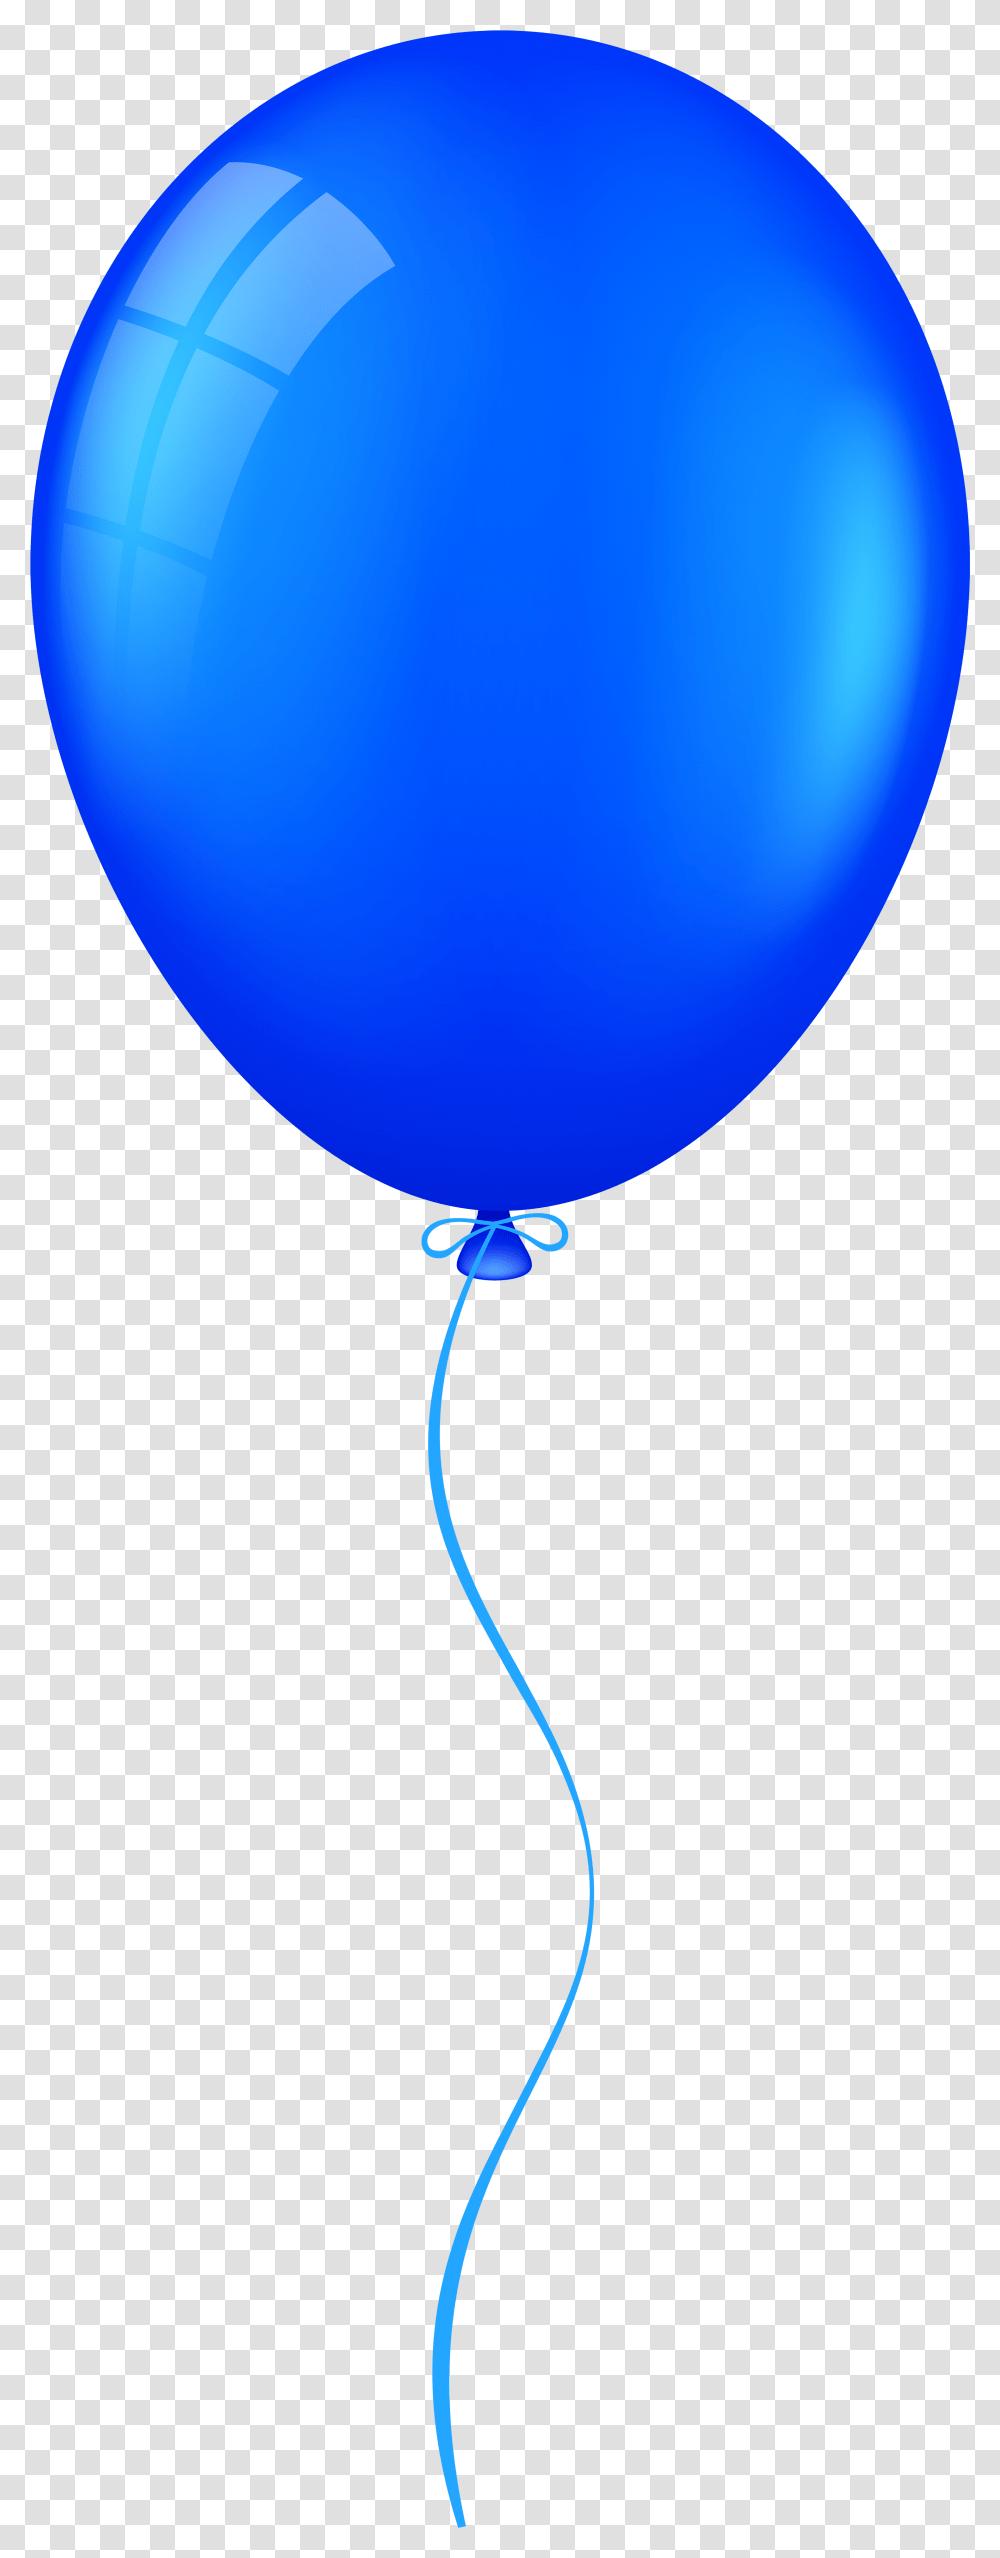 Balloon Clip Art With Background Clip Art Blue Balloon Transparent Png